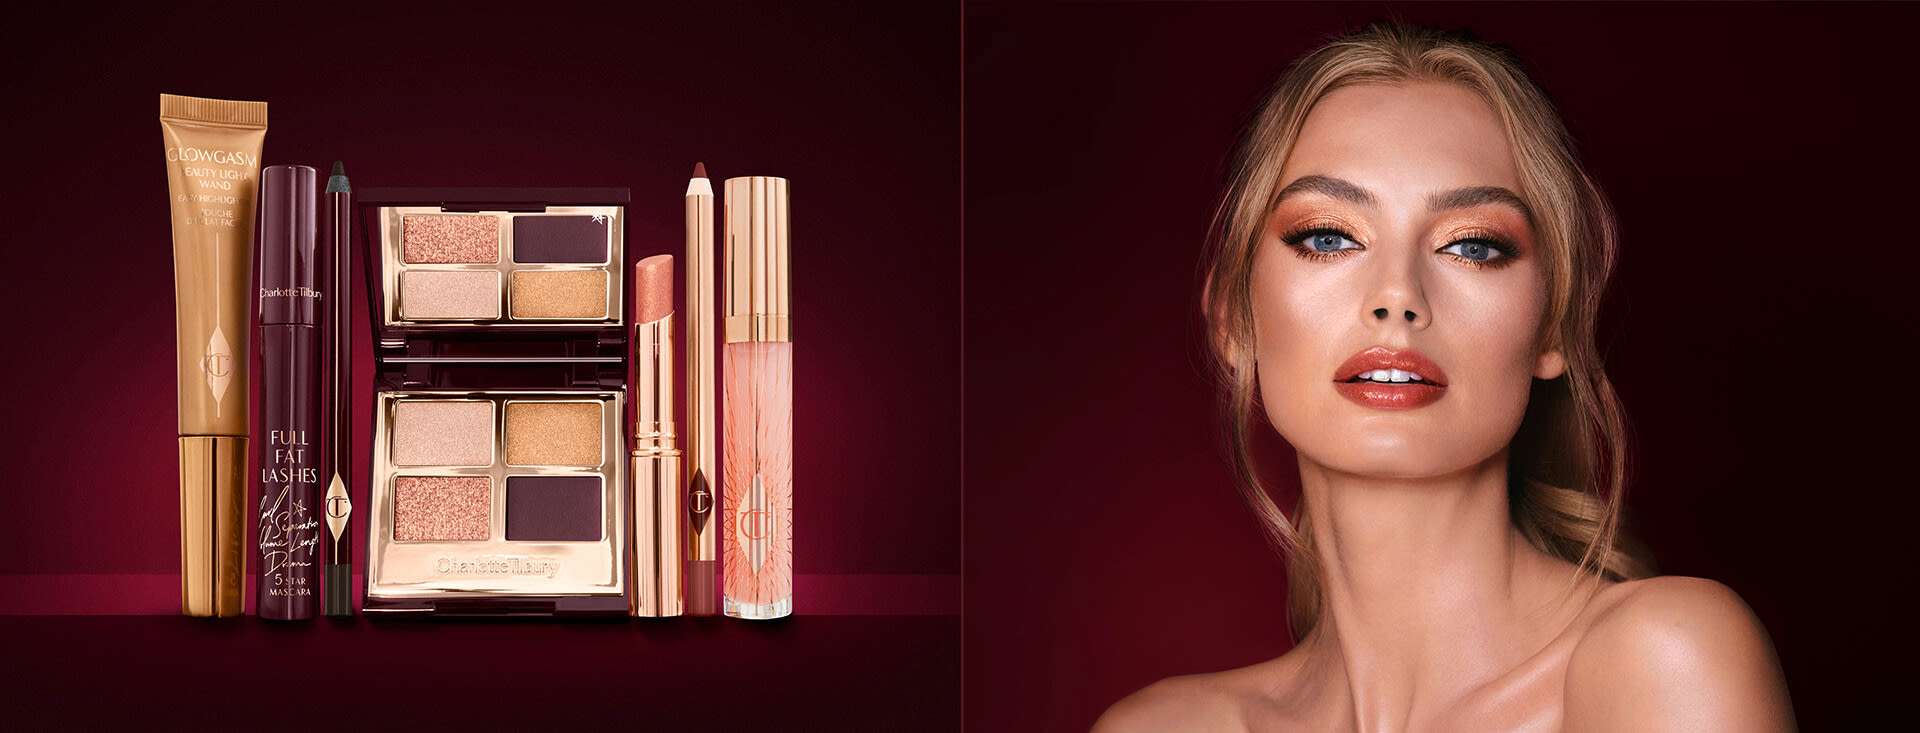 A fair-tone model with blue eyes wearing shimmery copper and gold eye makeup with black eyeliner, glowy bronzed cheeks, and pinkish-brown lipstick with gloss on top, along with a  highlighter wand in a honey-gold-coloured tube with a mascara, eyeliner pencil, quad eyeshadow palette with shimmery and matte rose gold, plum, and golden shades, an open lipstick in nude coral, lip liner pencil in soft plum, and a lip gloss in nude pink. 